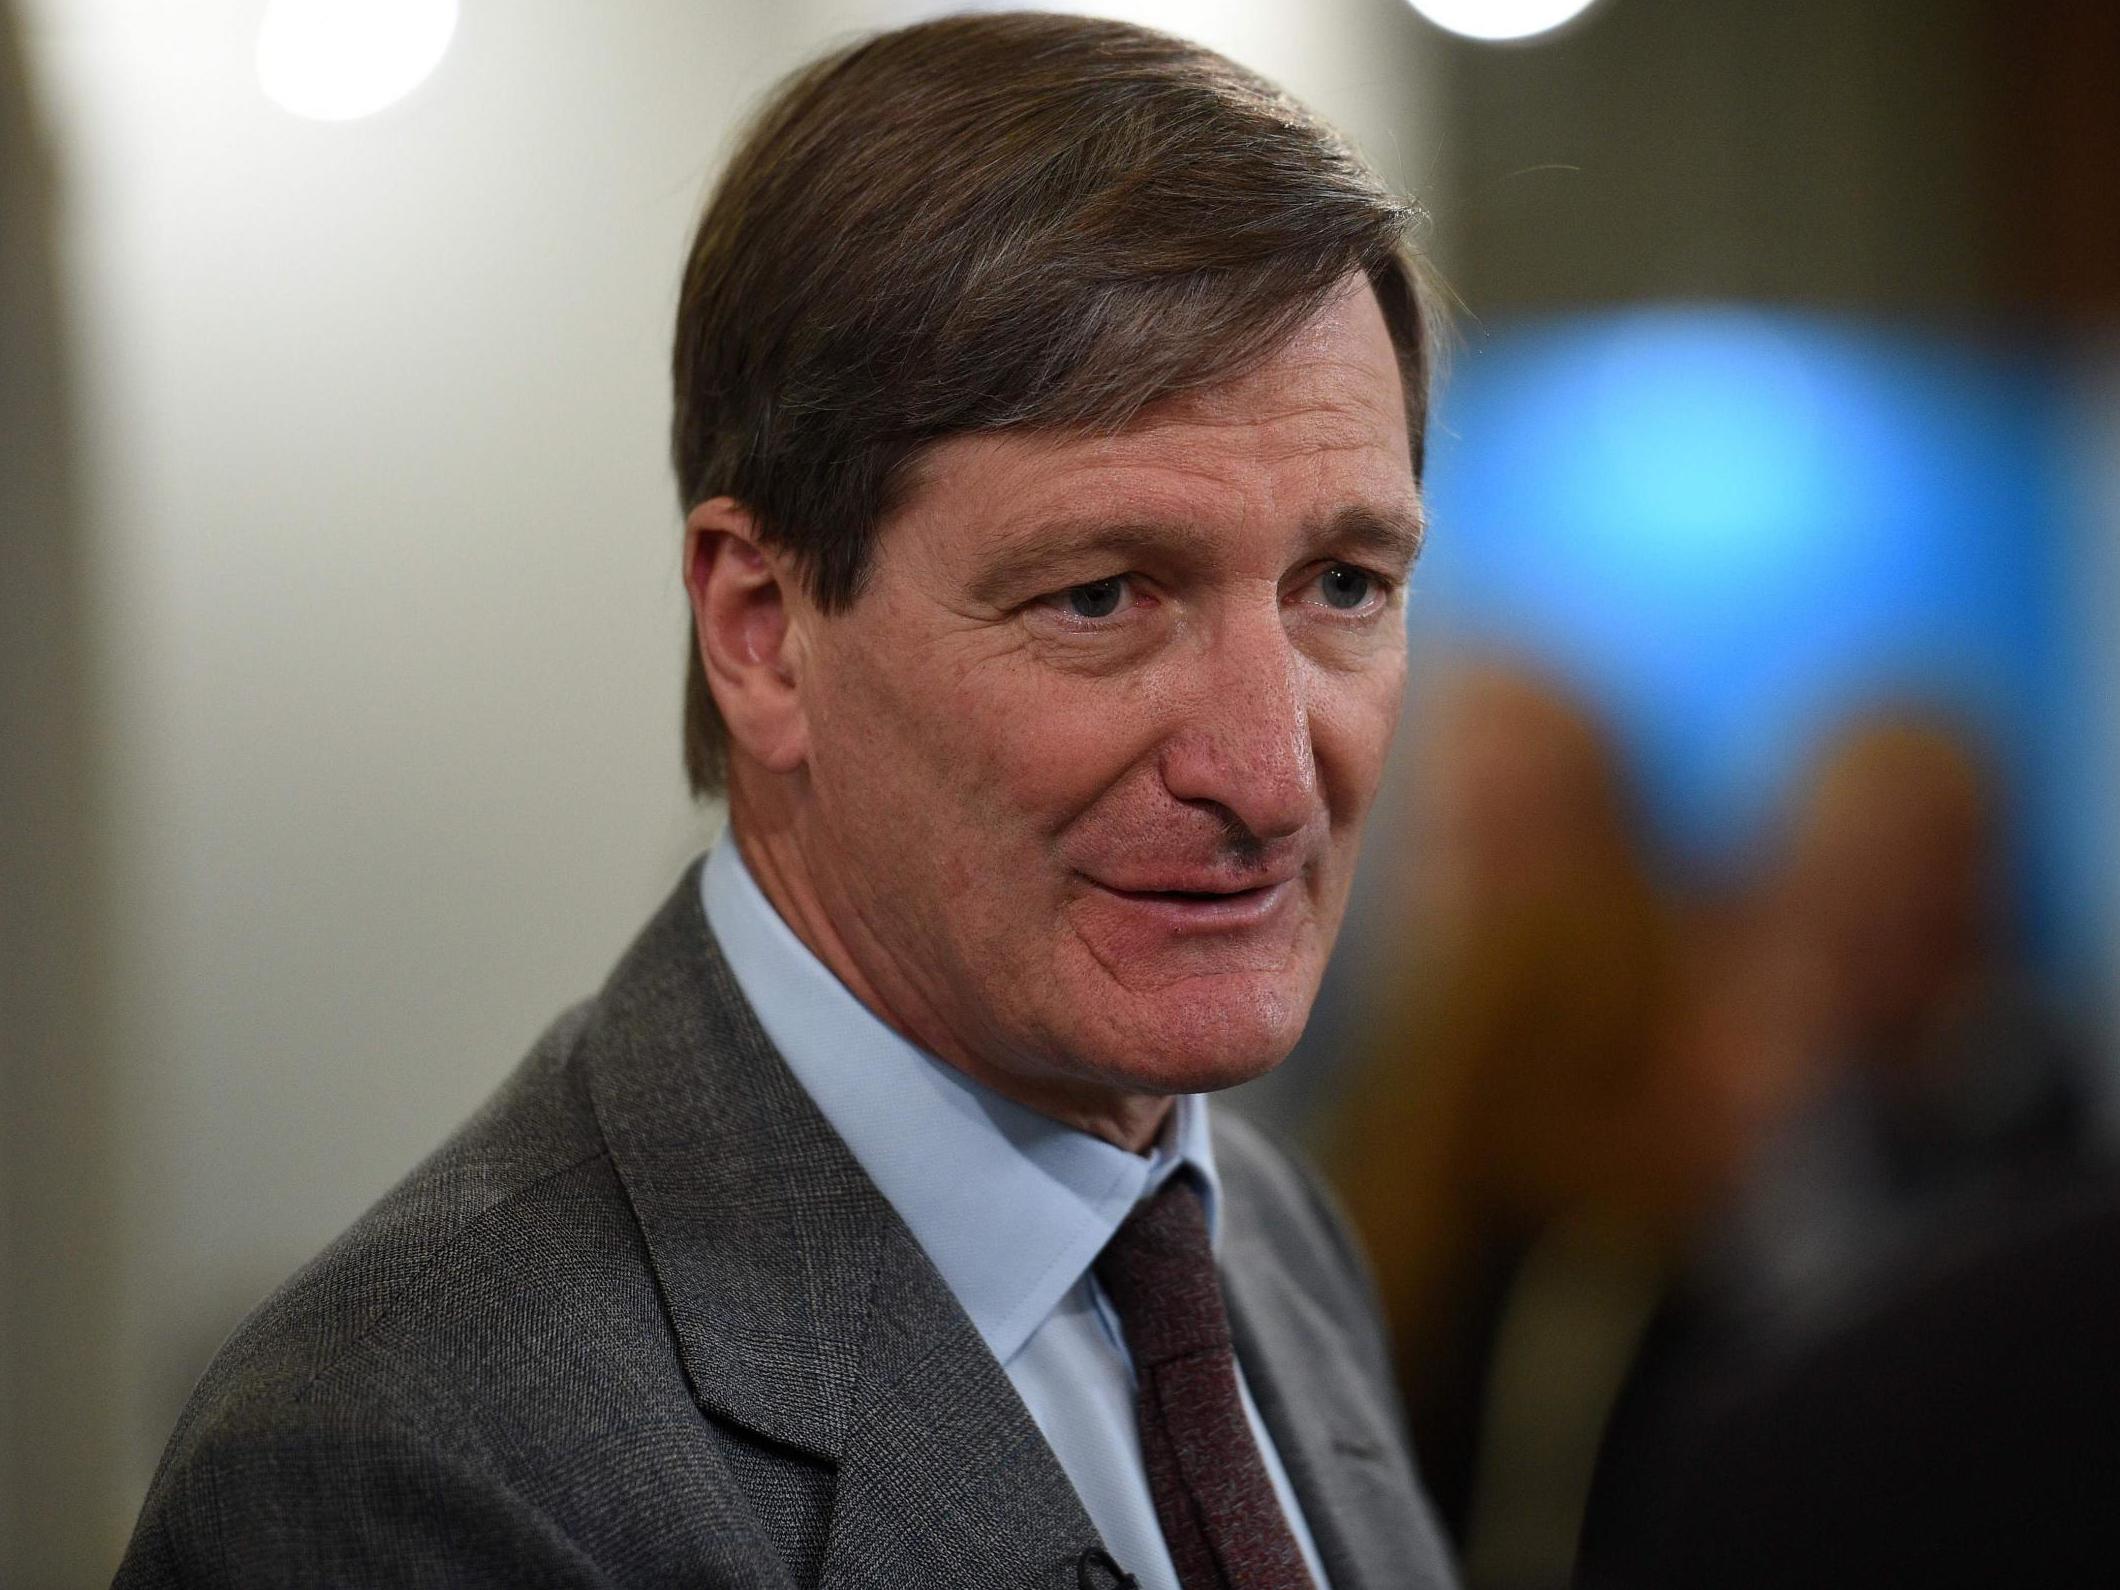 Dominic Grieve has questioned why the report has not been released.